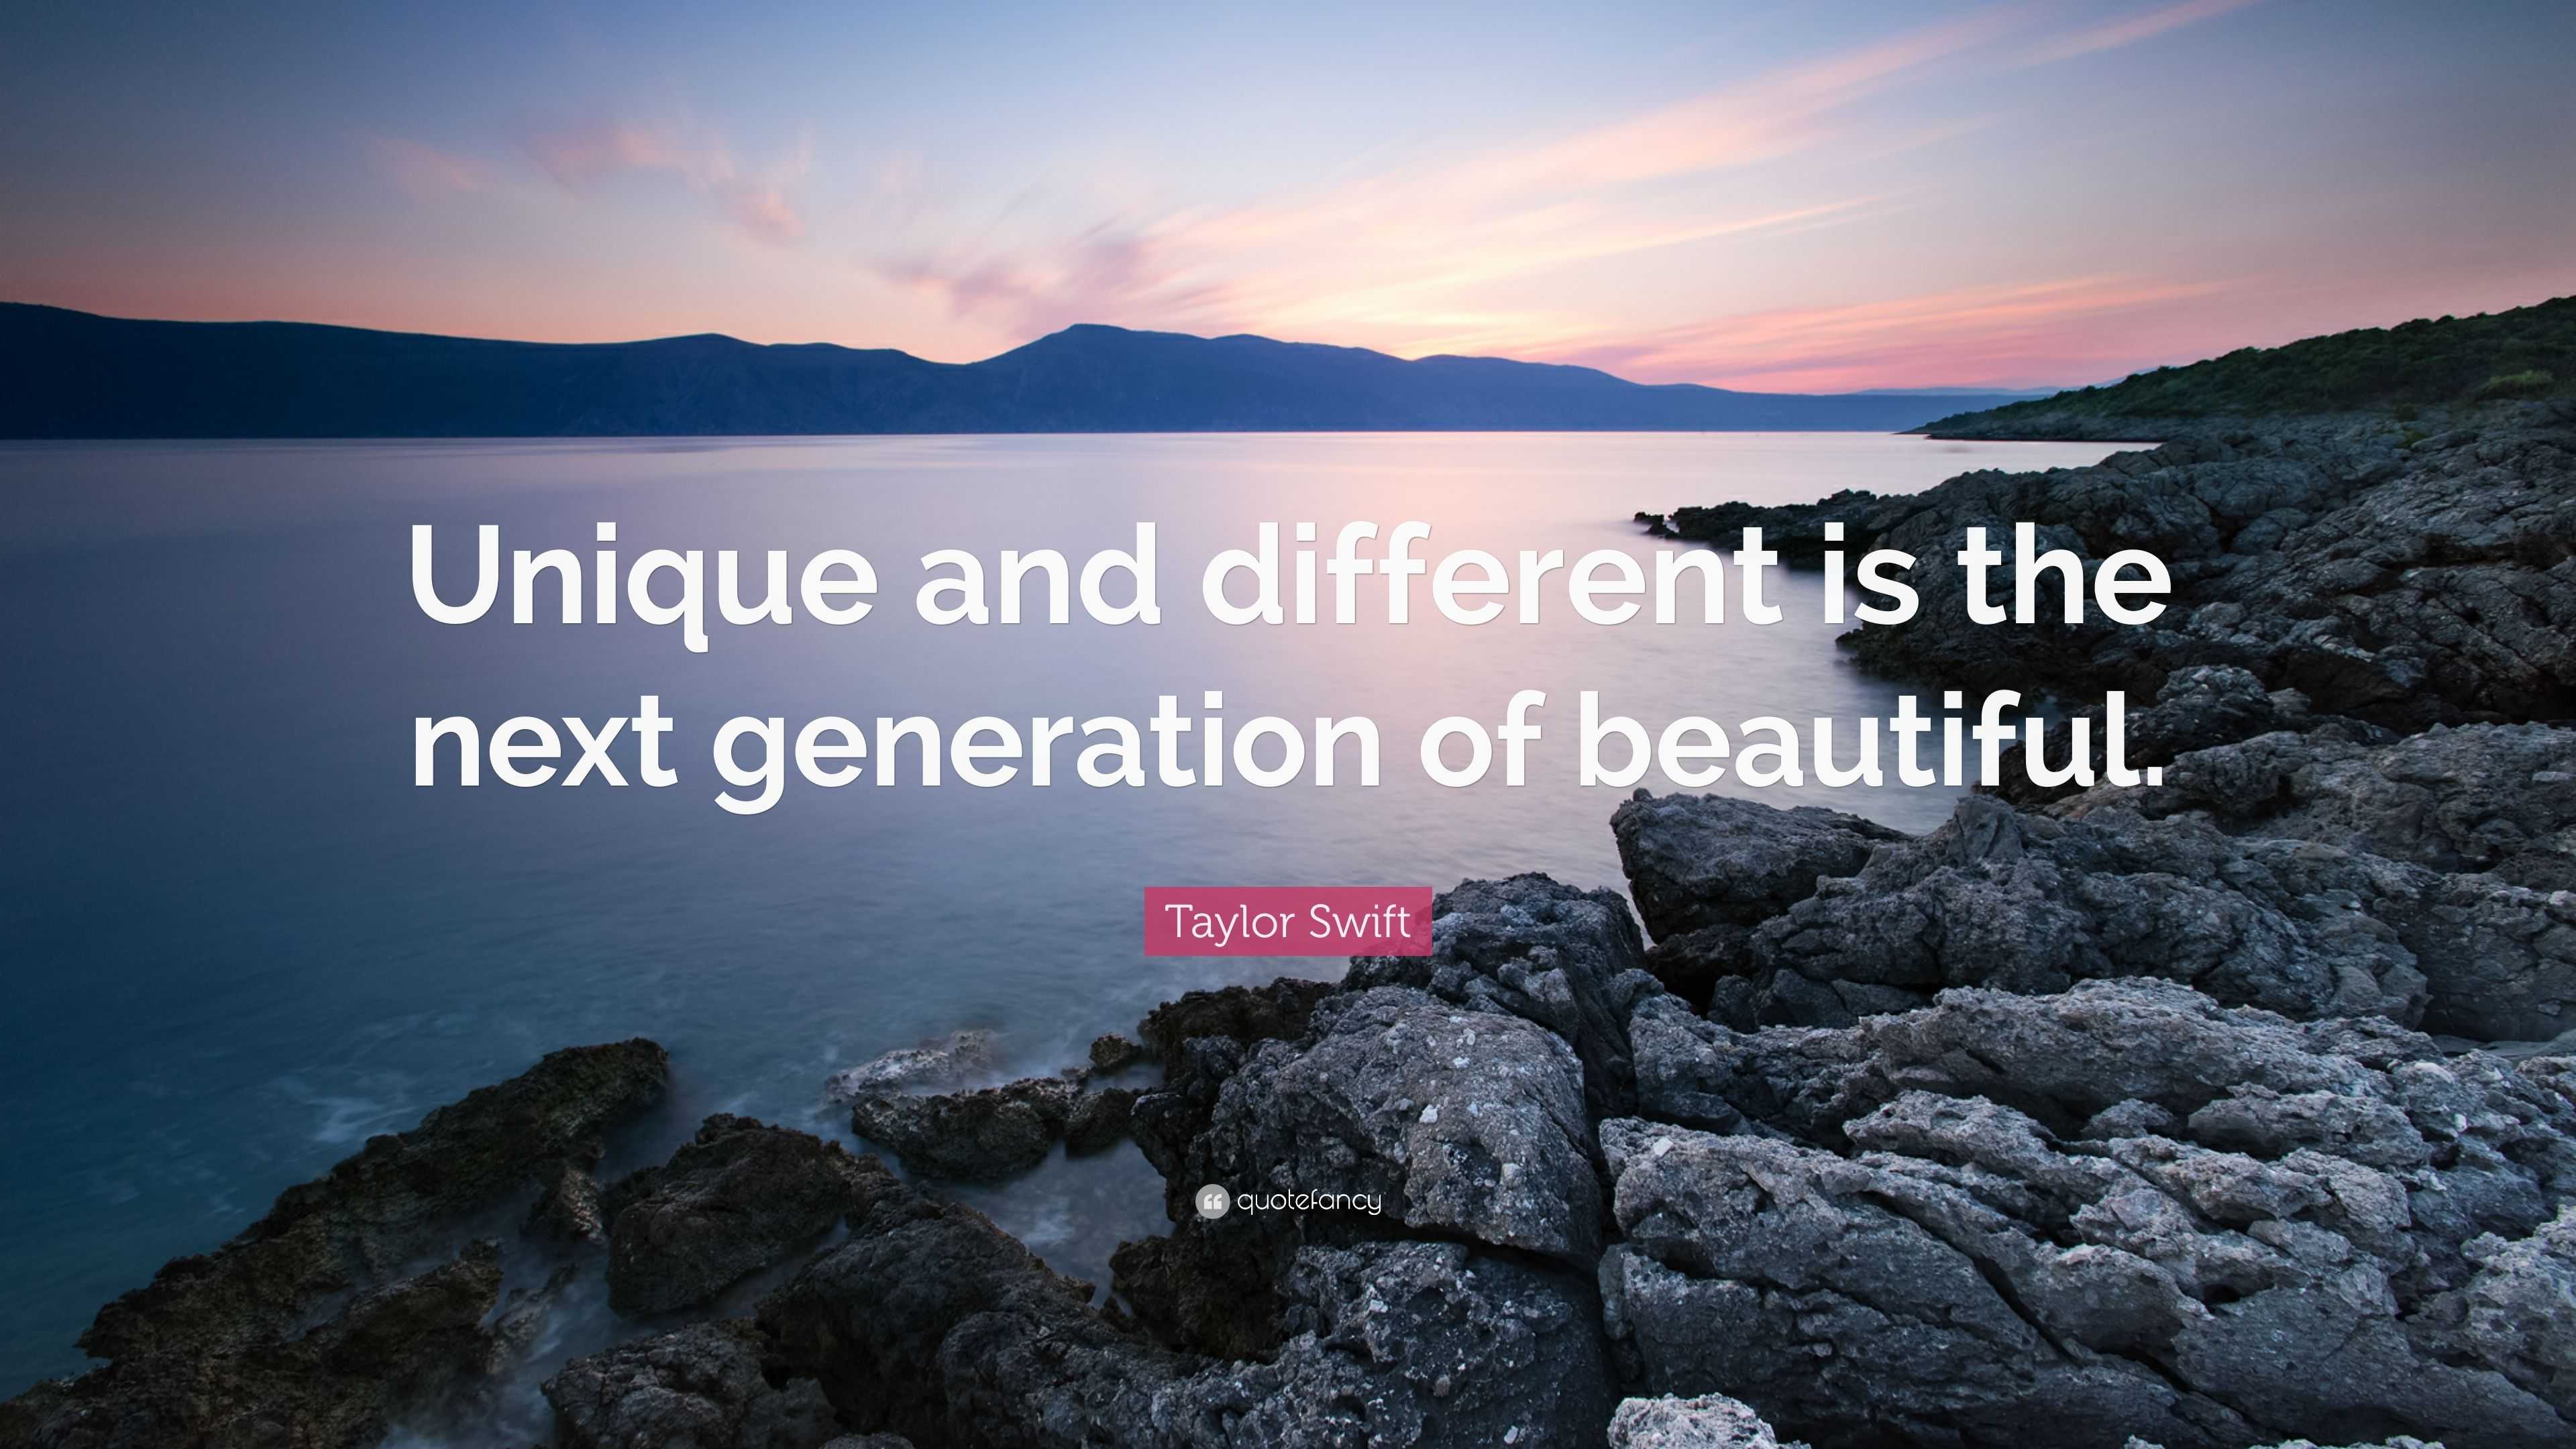 Taylor Swift Quote: “Unique and different is the next generation